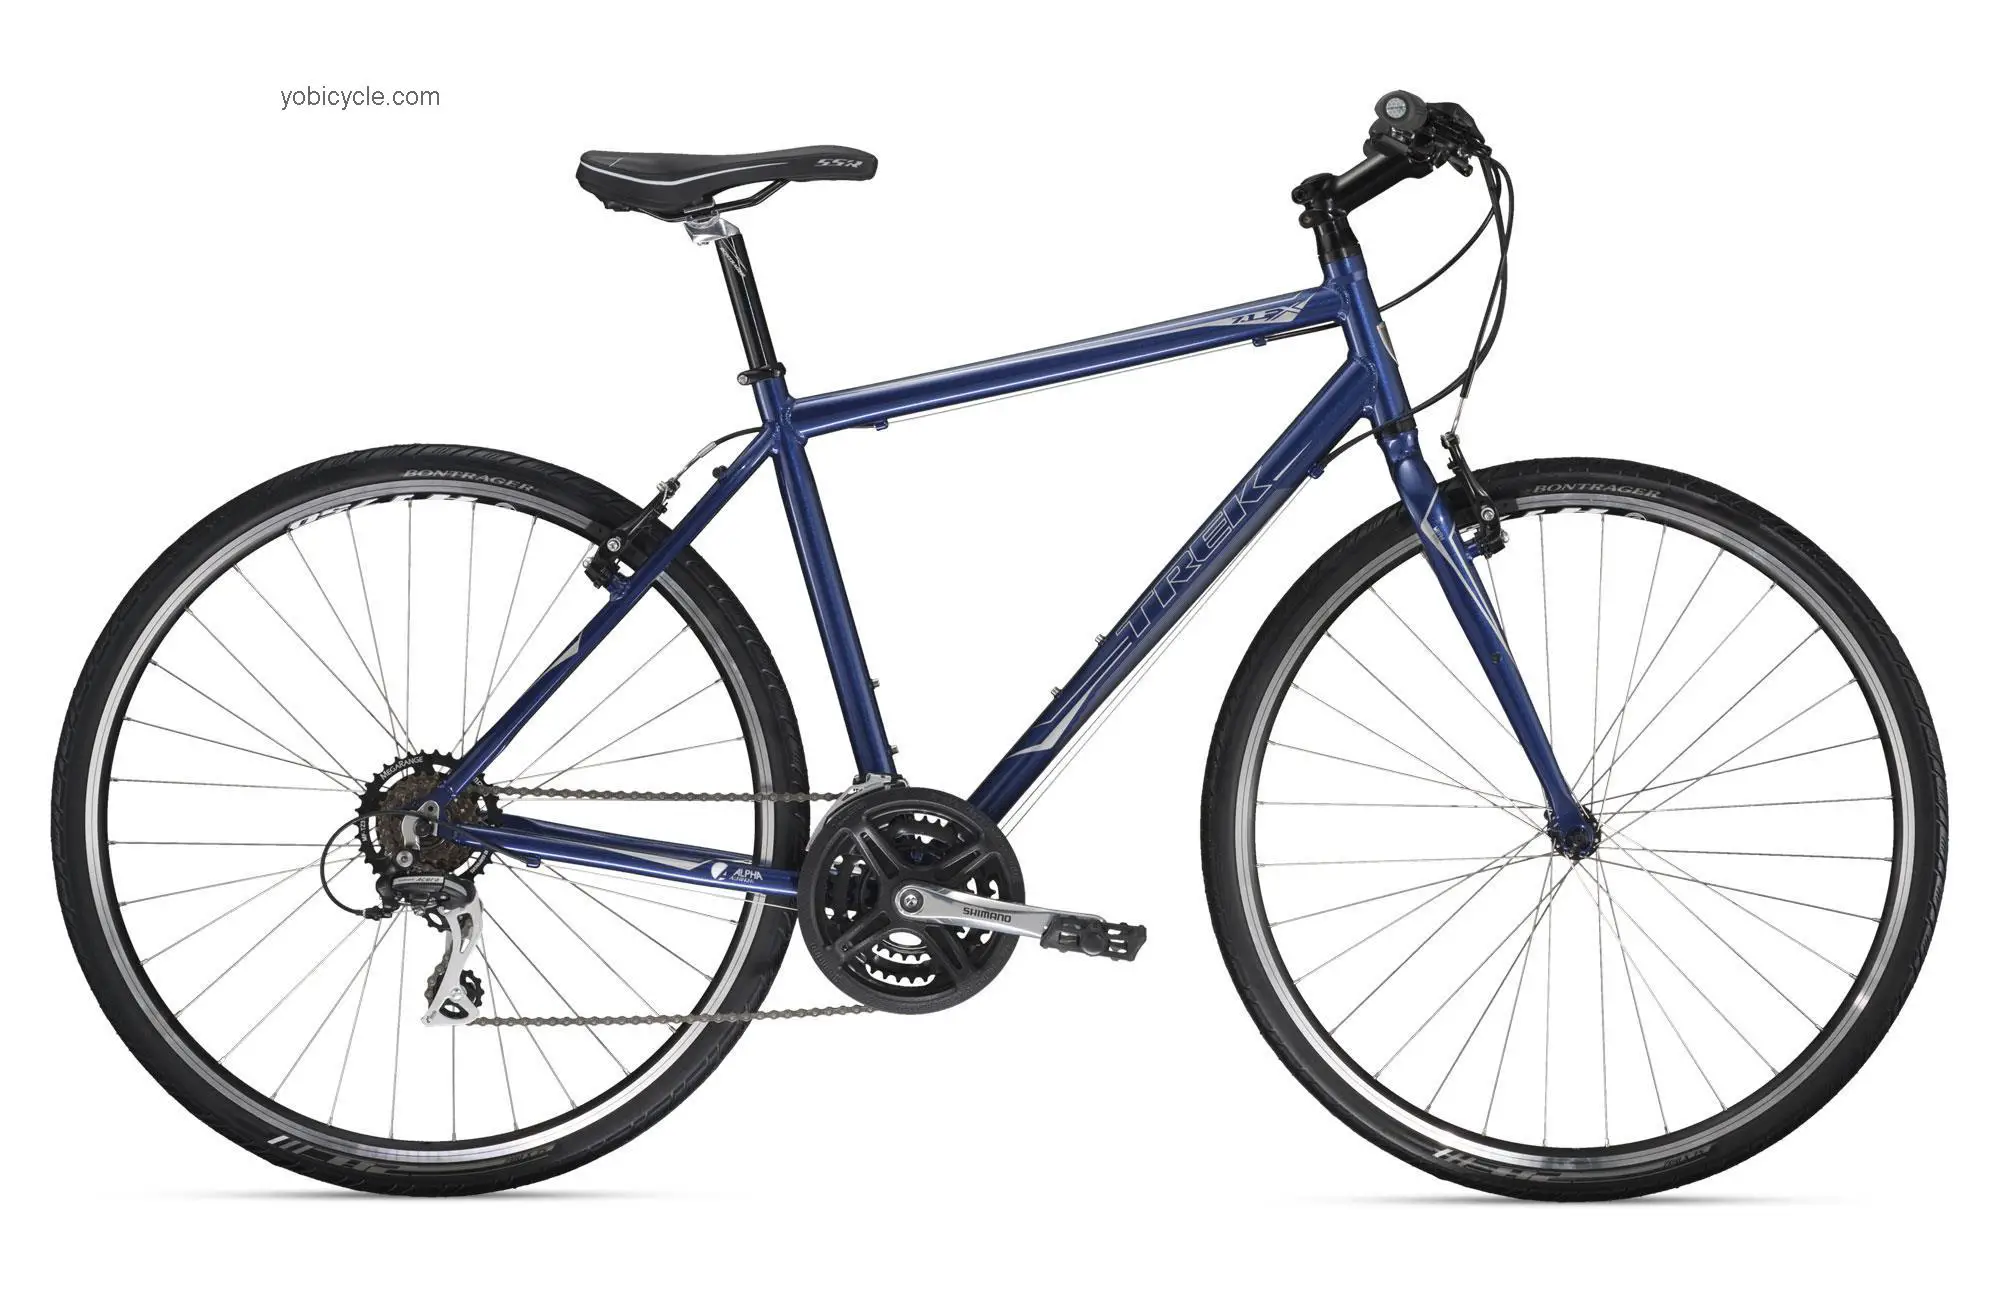 Trek 7.2 FX WSD Stagger 2011 comparison online with competitors